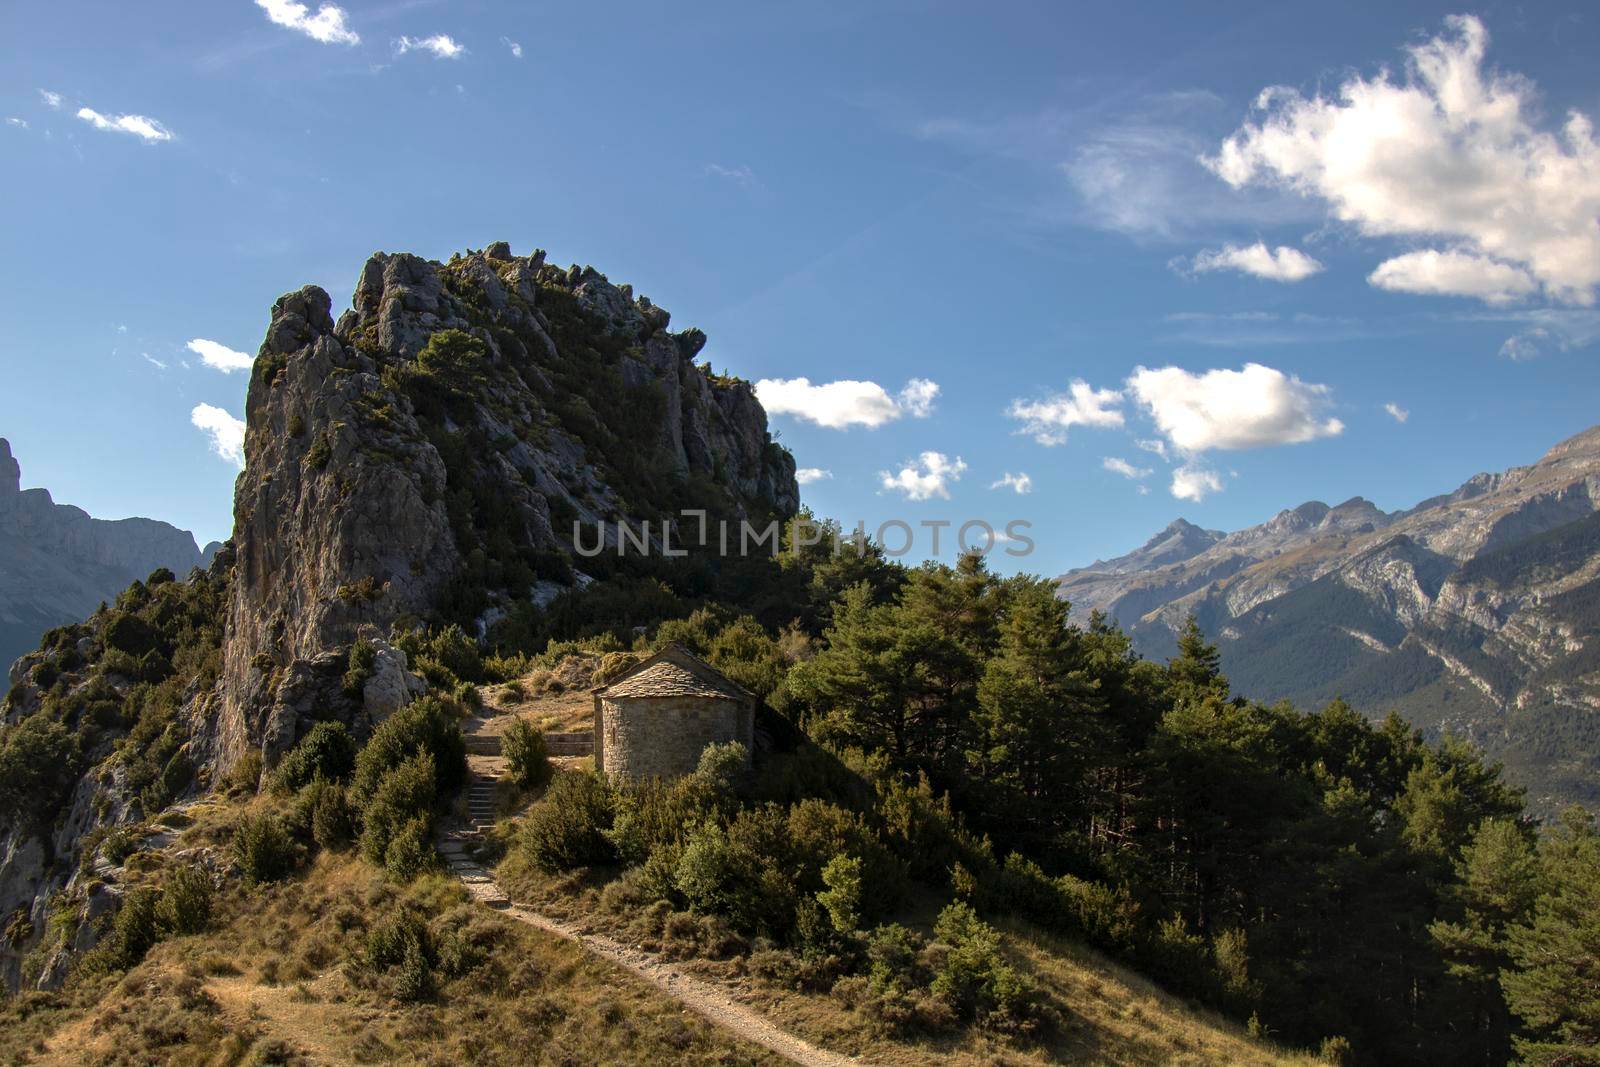 Hermitage under a rocky peak in the Pyrenees in a trekking route called Ermitas de Tella in Huesca province in Spain